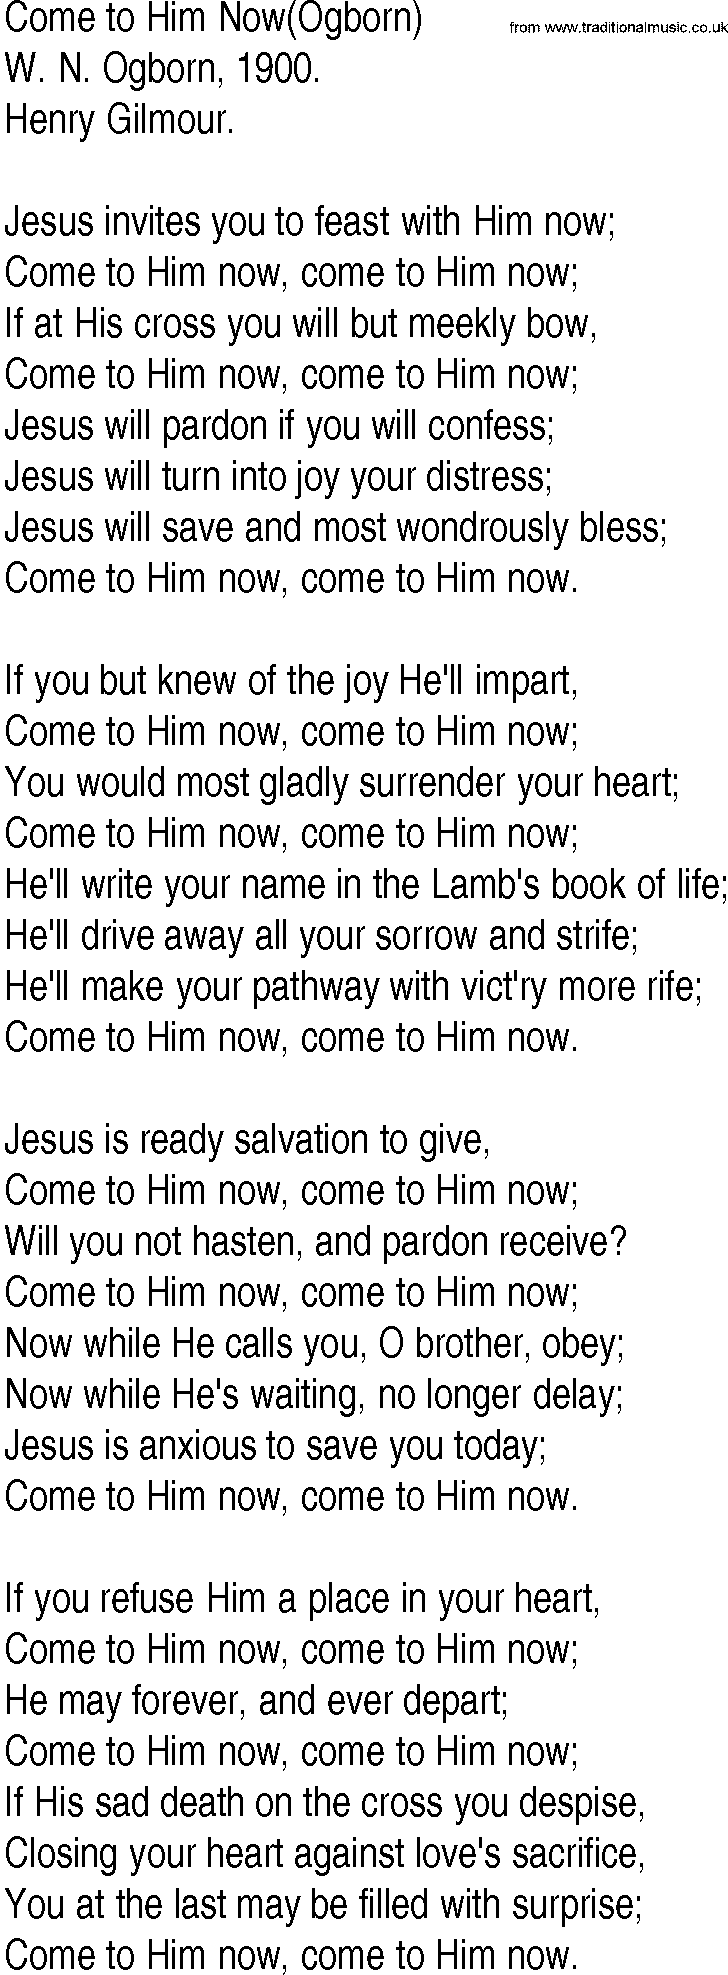 Hymn and Gospel Song: Come to Him Now(Ogborn) by W N Ogborn lyrics